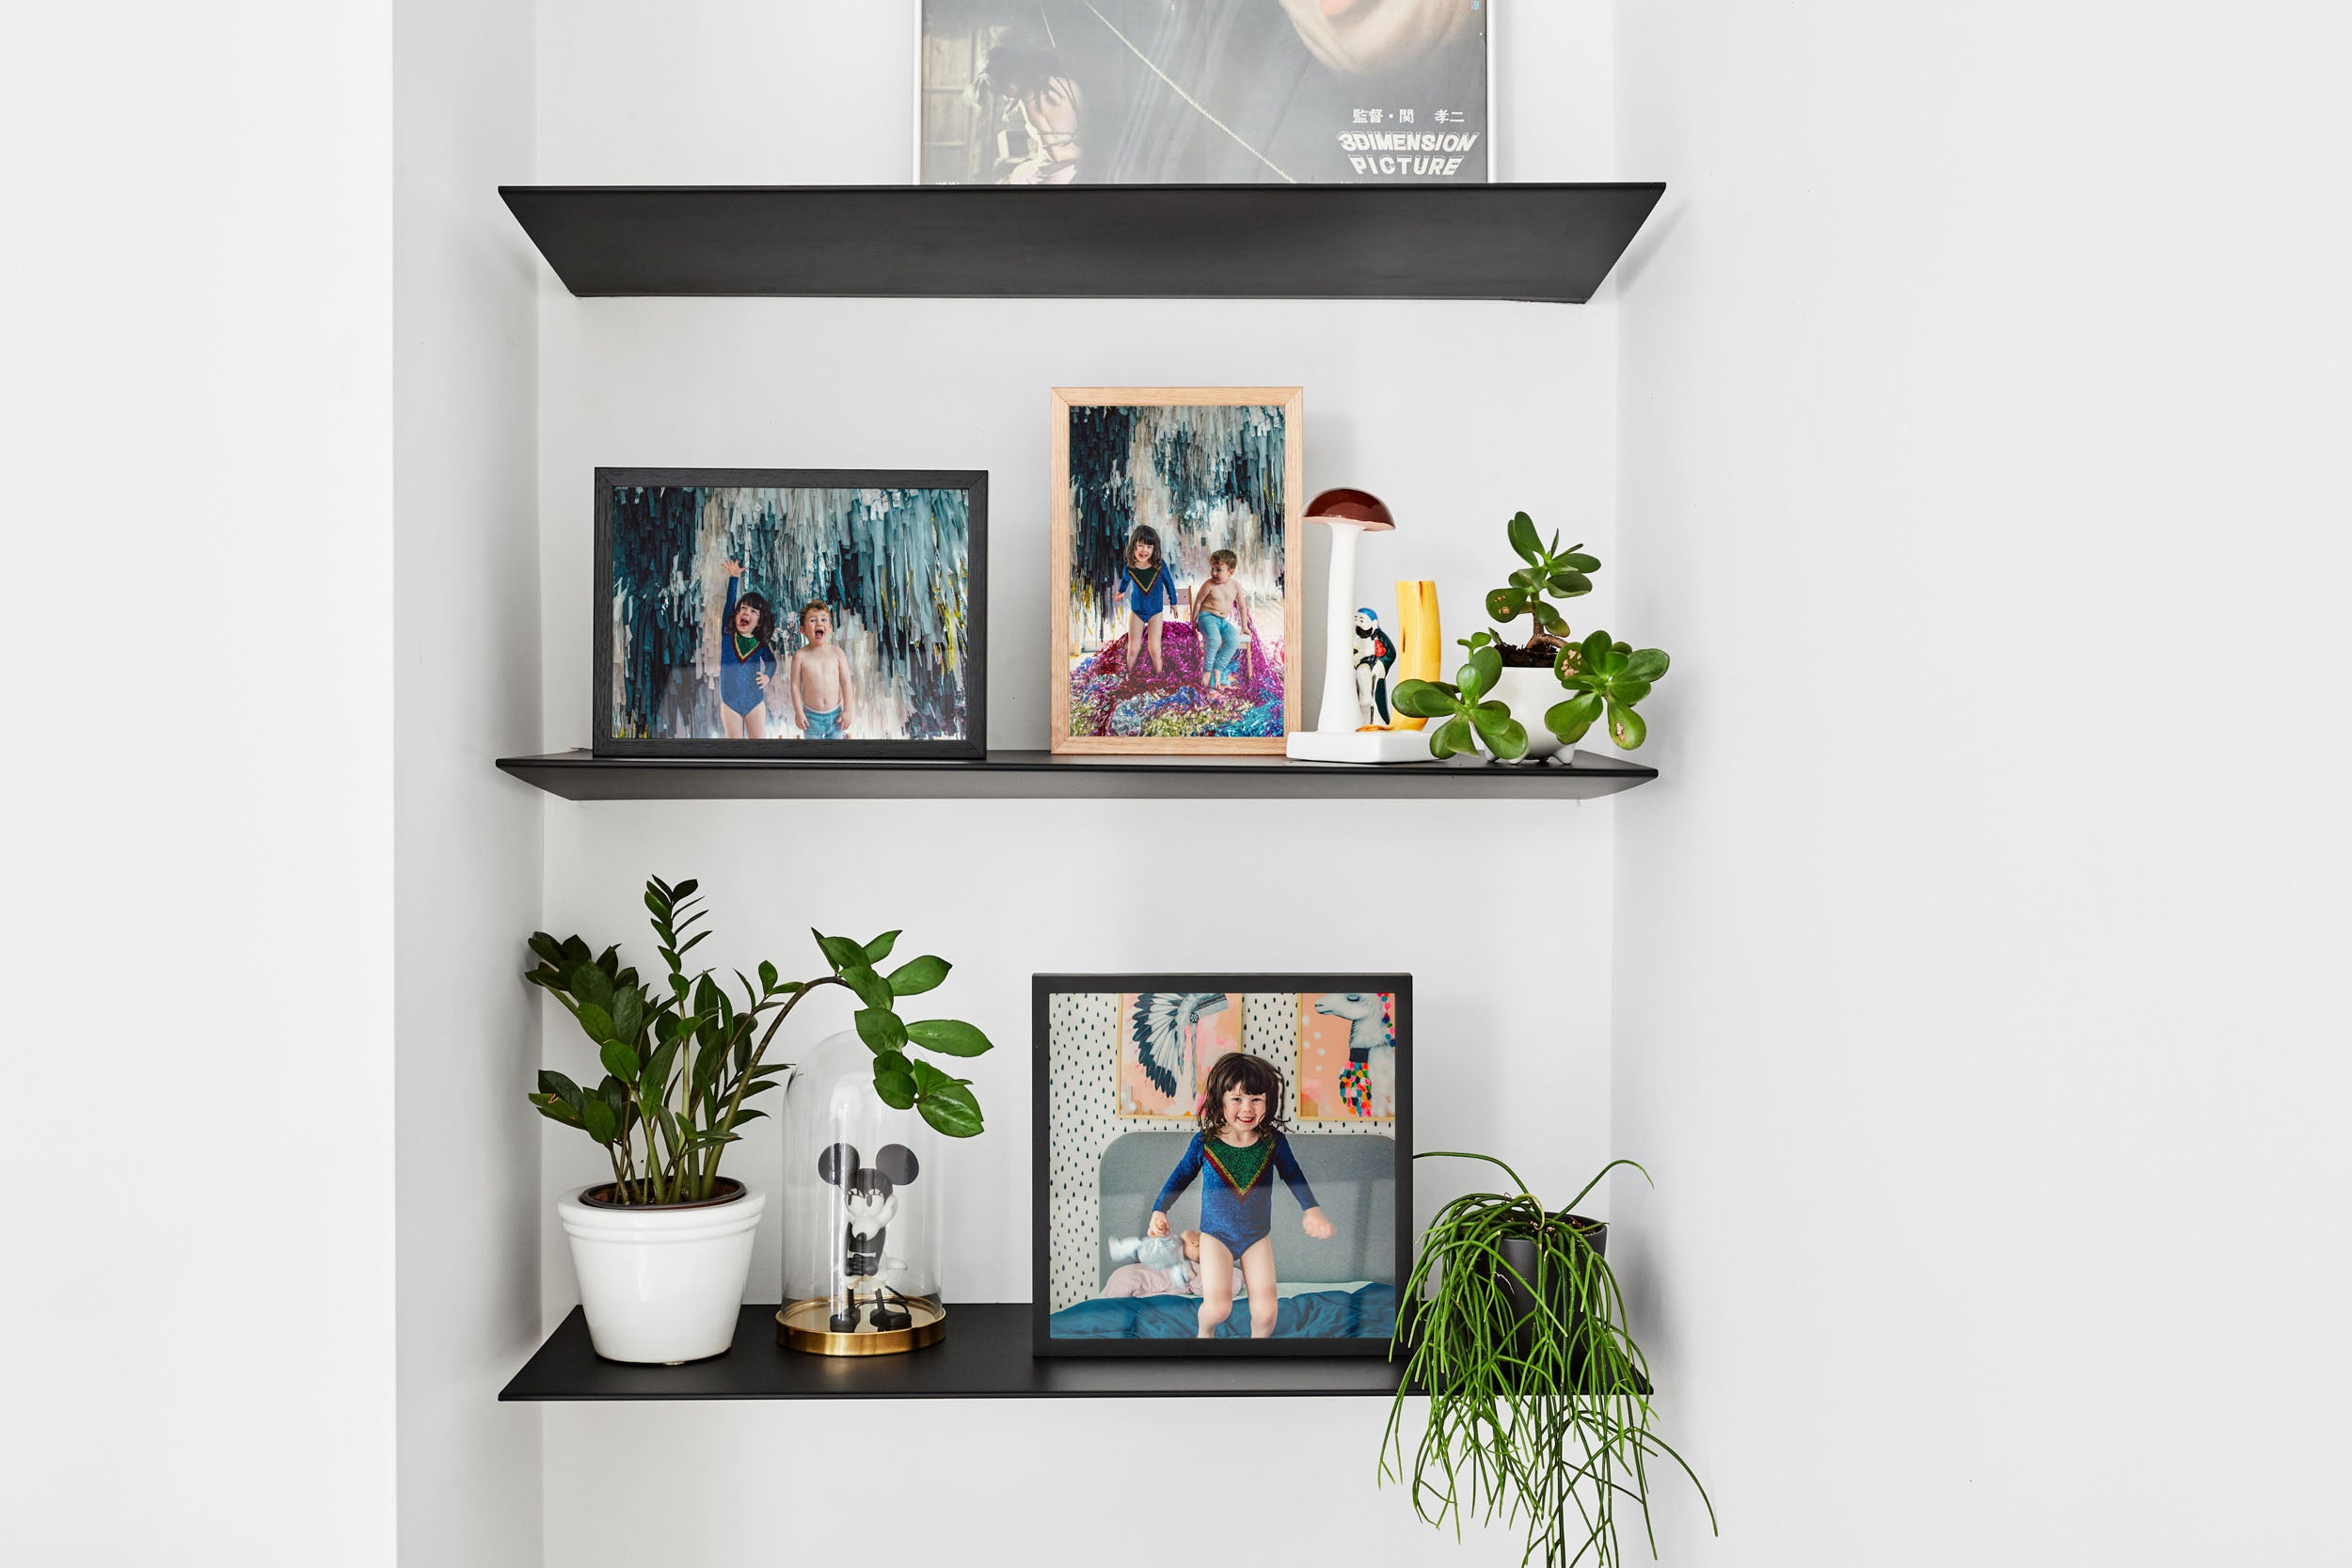 Format Framing Gallery Wall: How to Saloon Hang